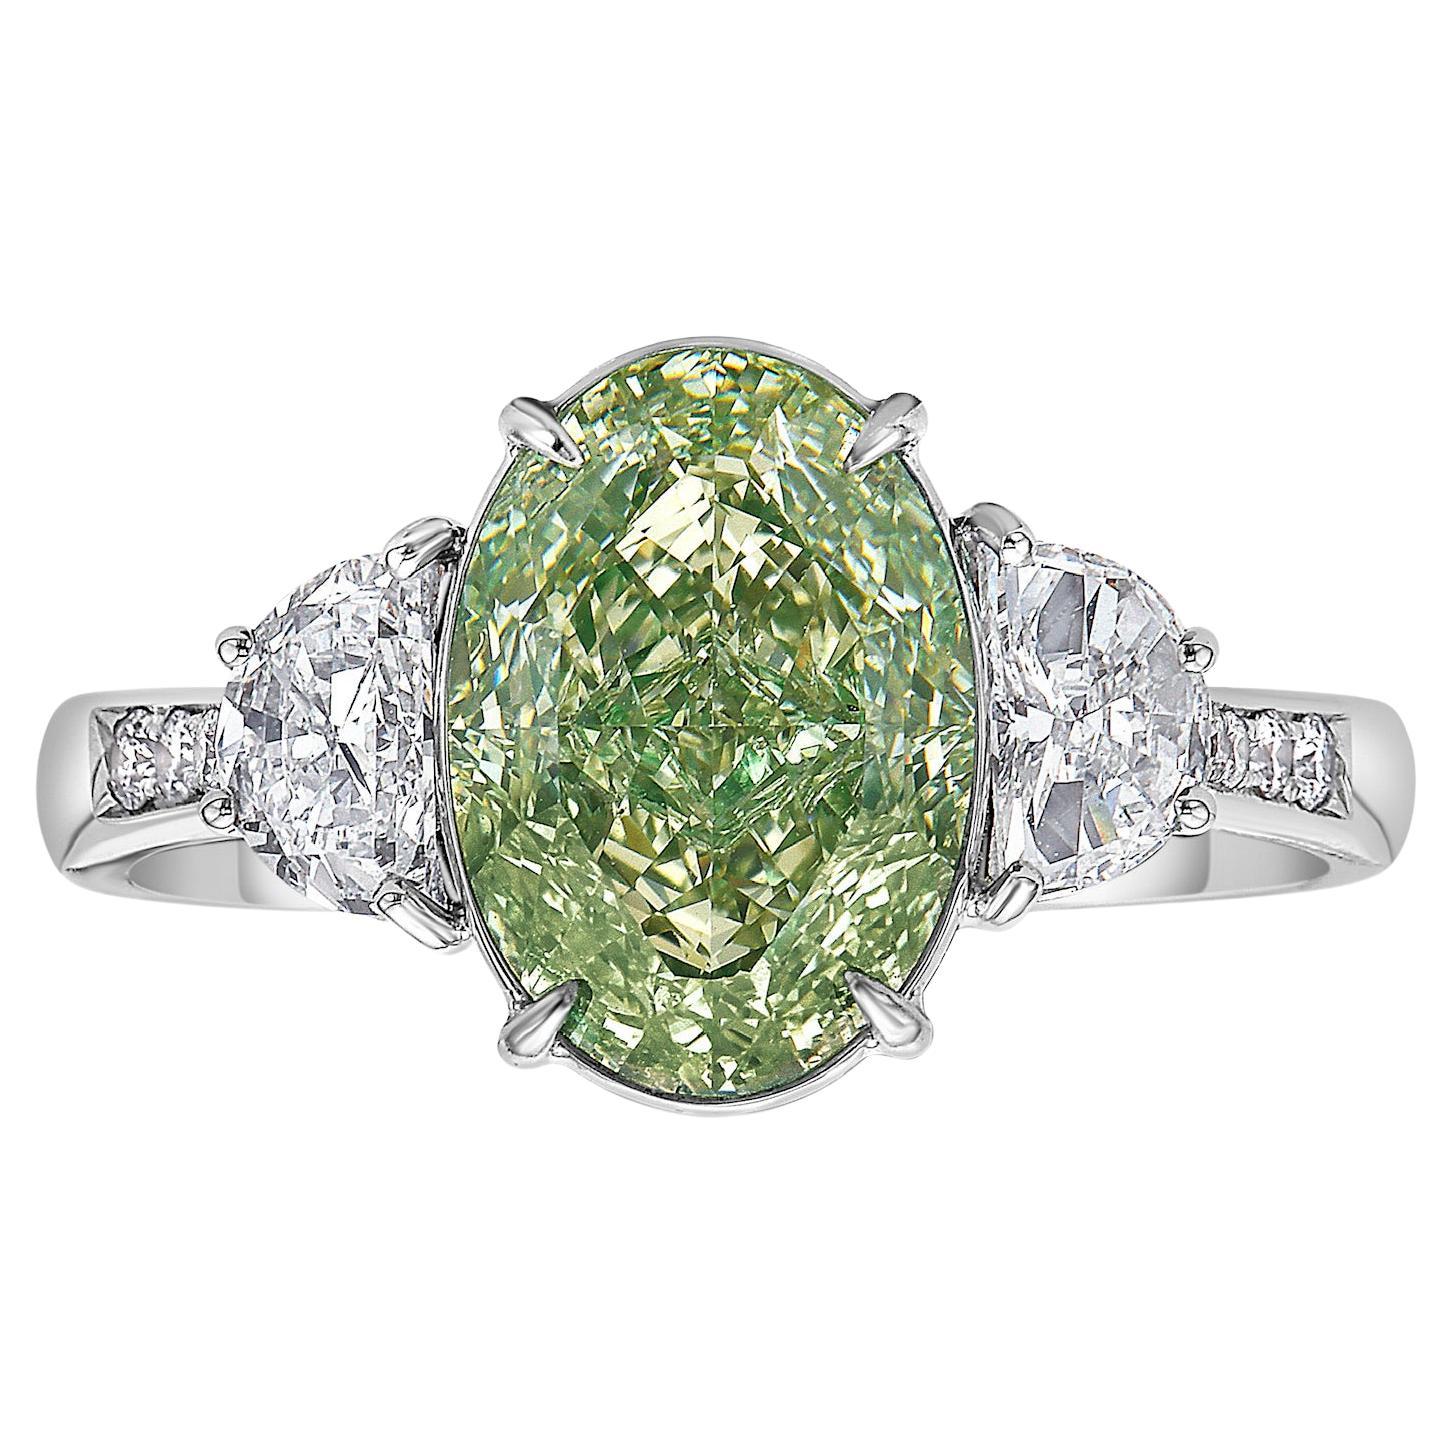 3.55ct Oval Green Diamond VVS2 GIA Ring For Sale